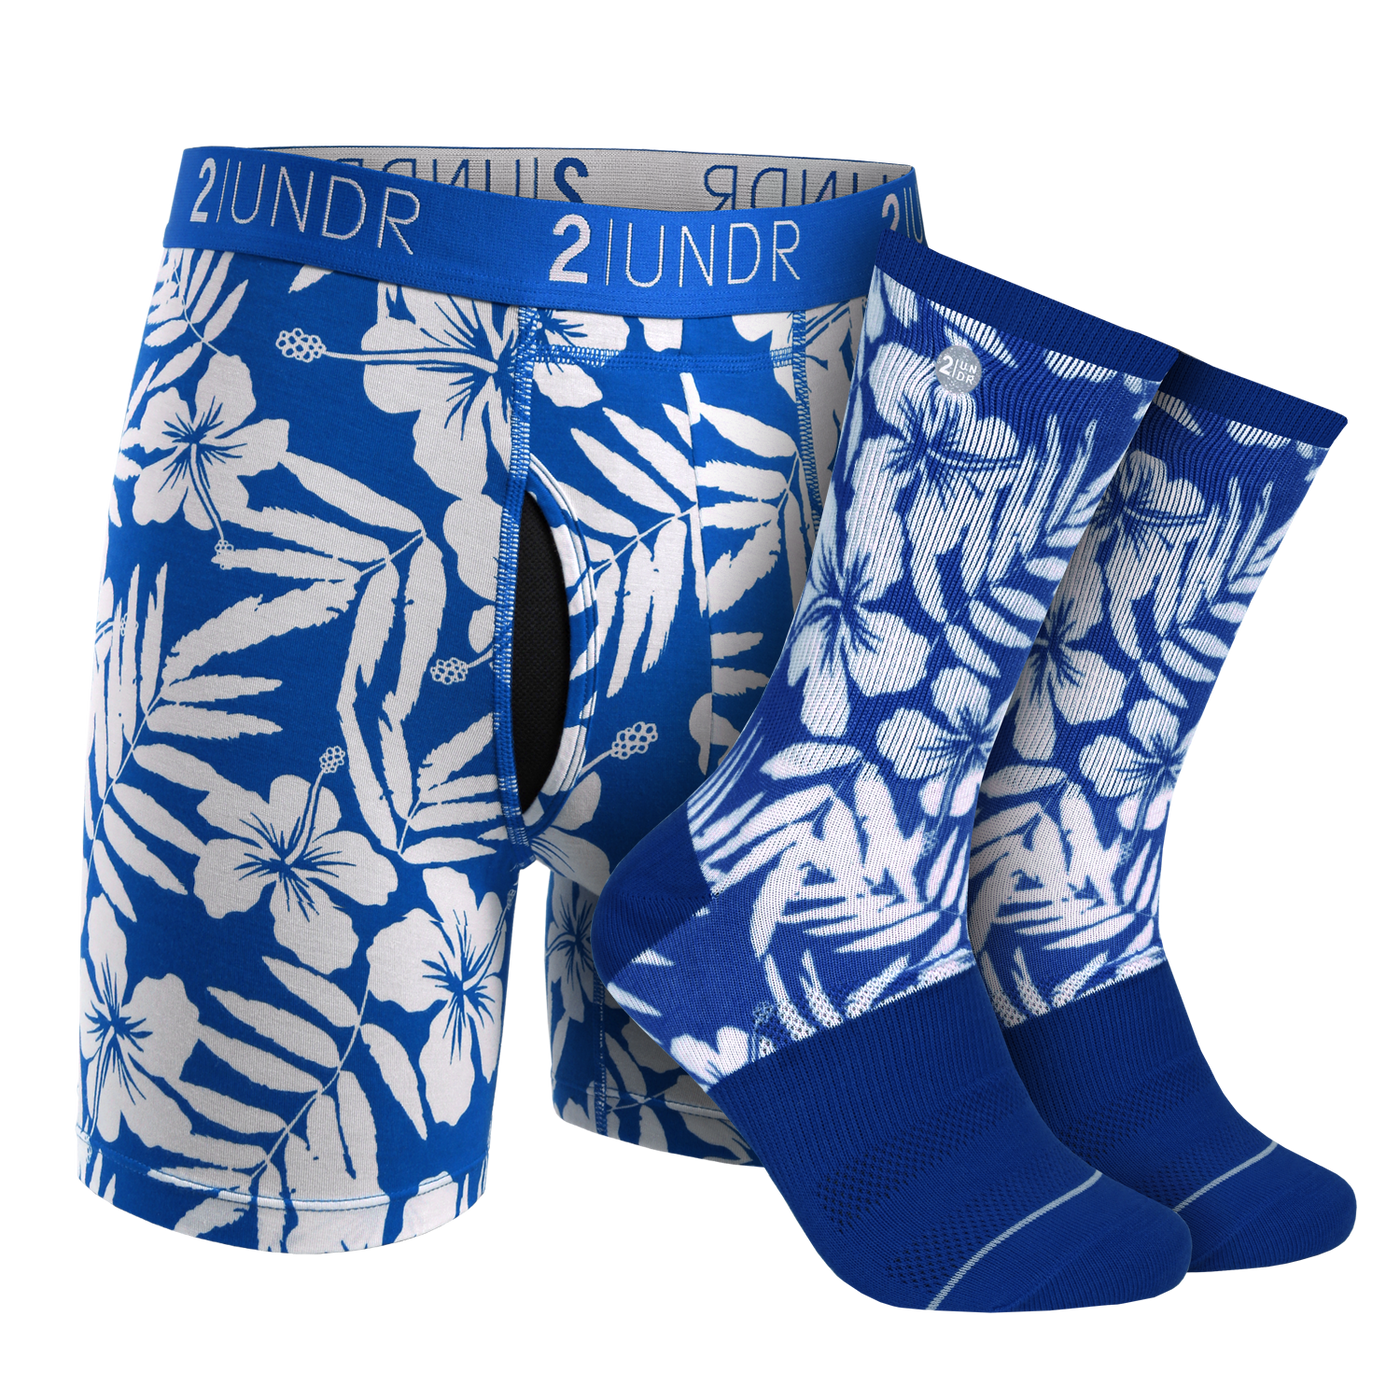 Swing Shift Boxer Brief - Groove Sock Pack - Maui